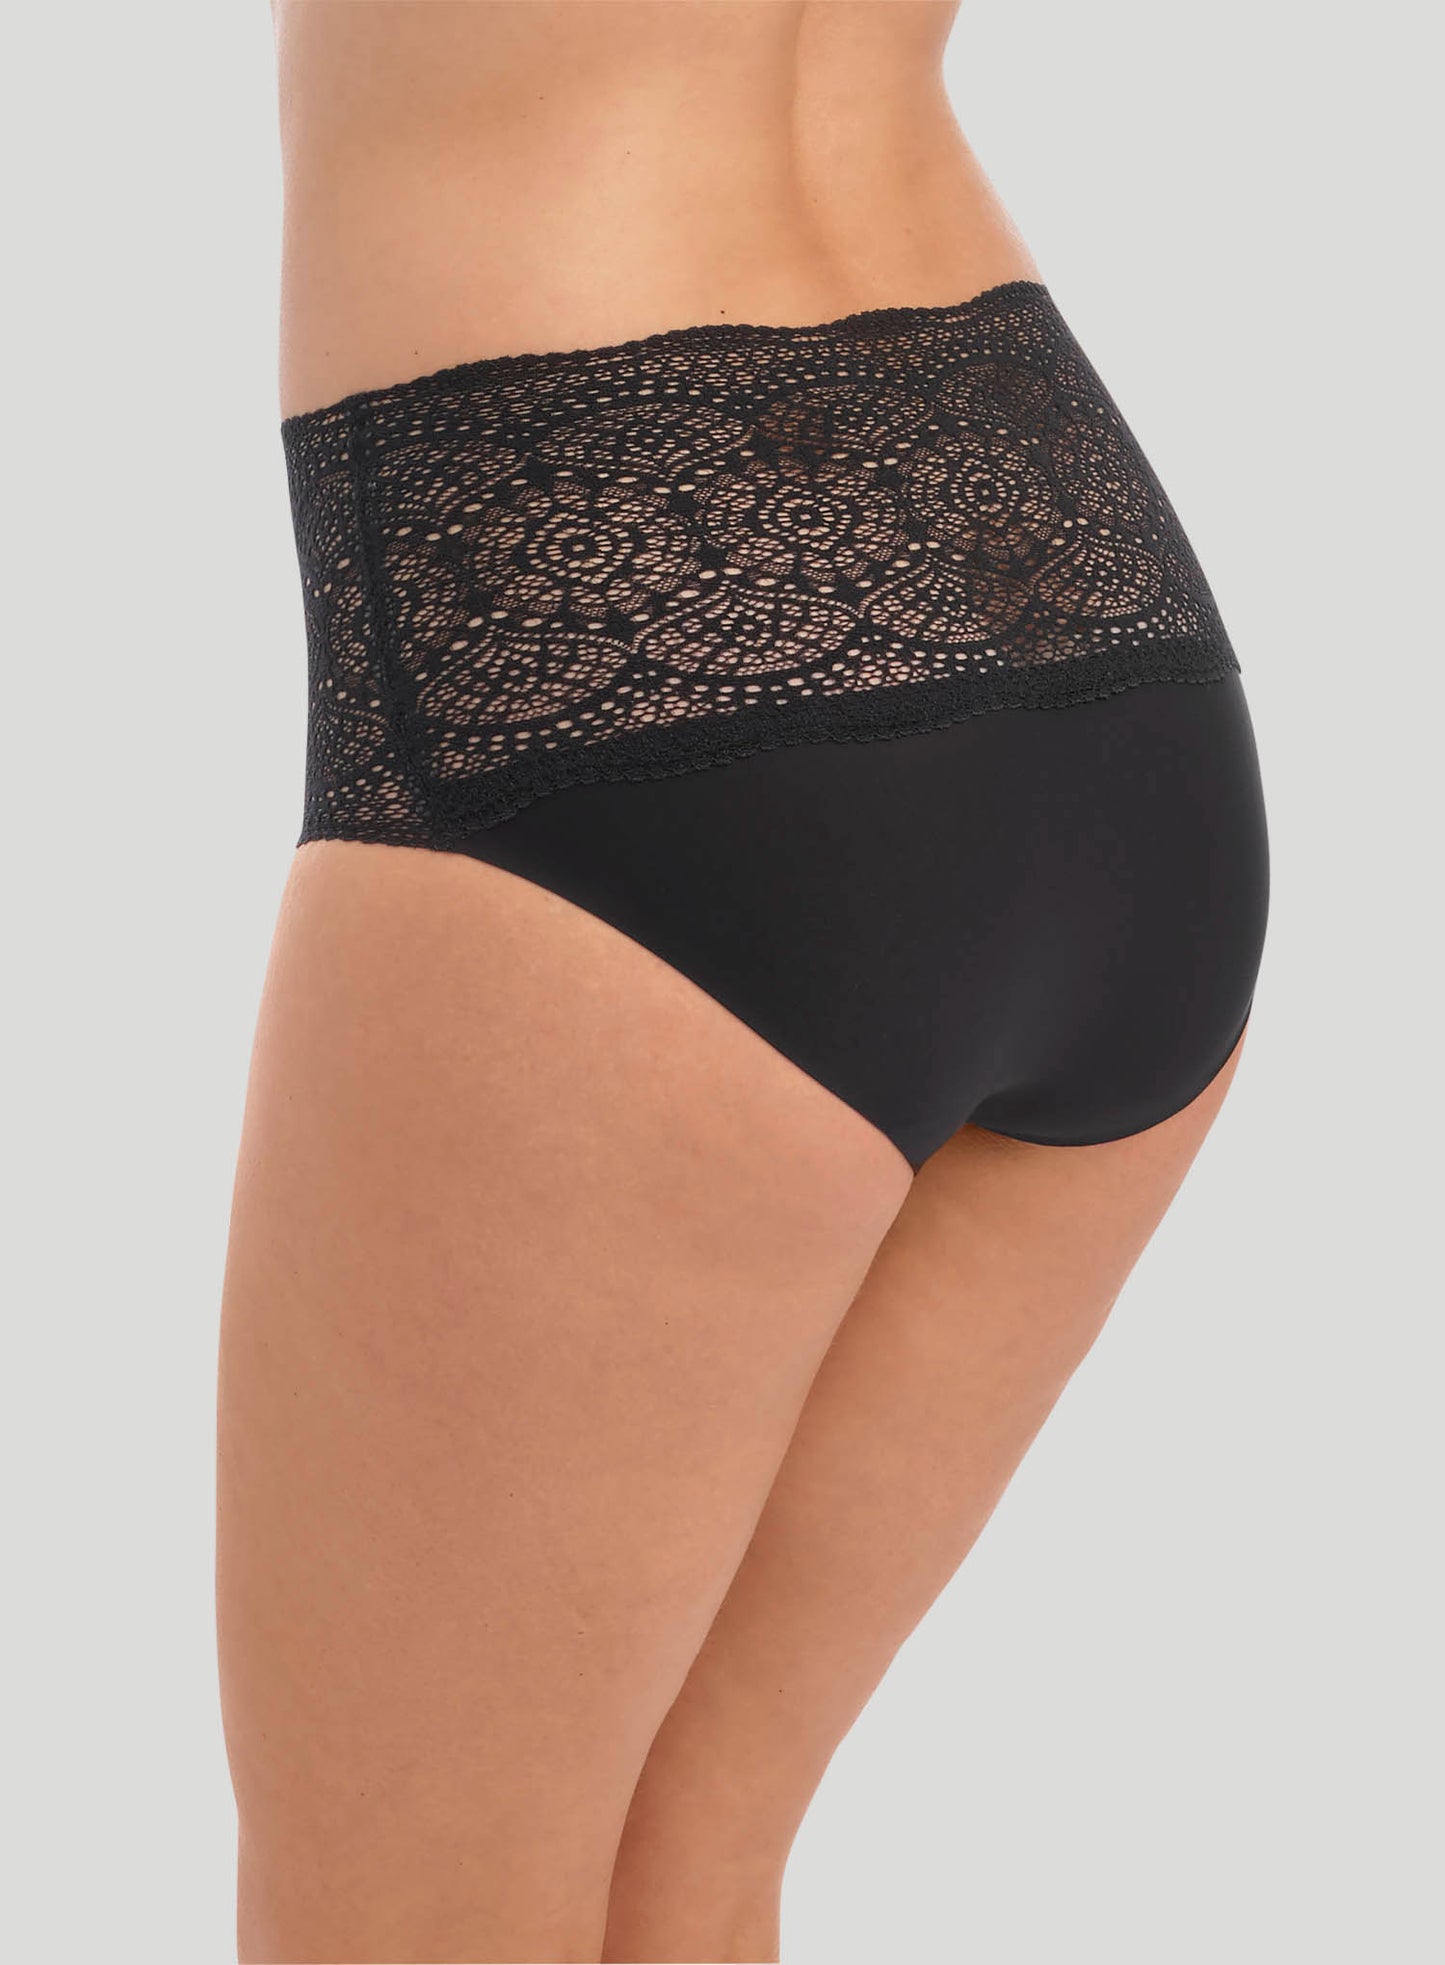 Fantasie: Lace Ease Invisible Stretch Full Brief Black